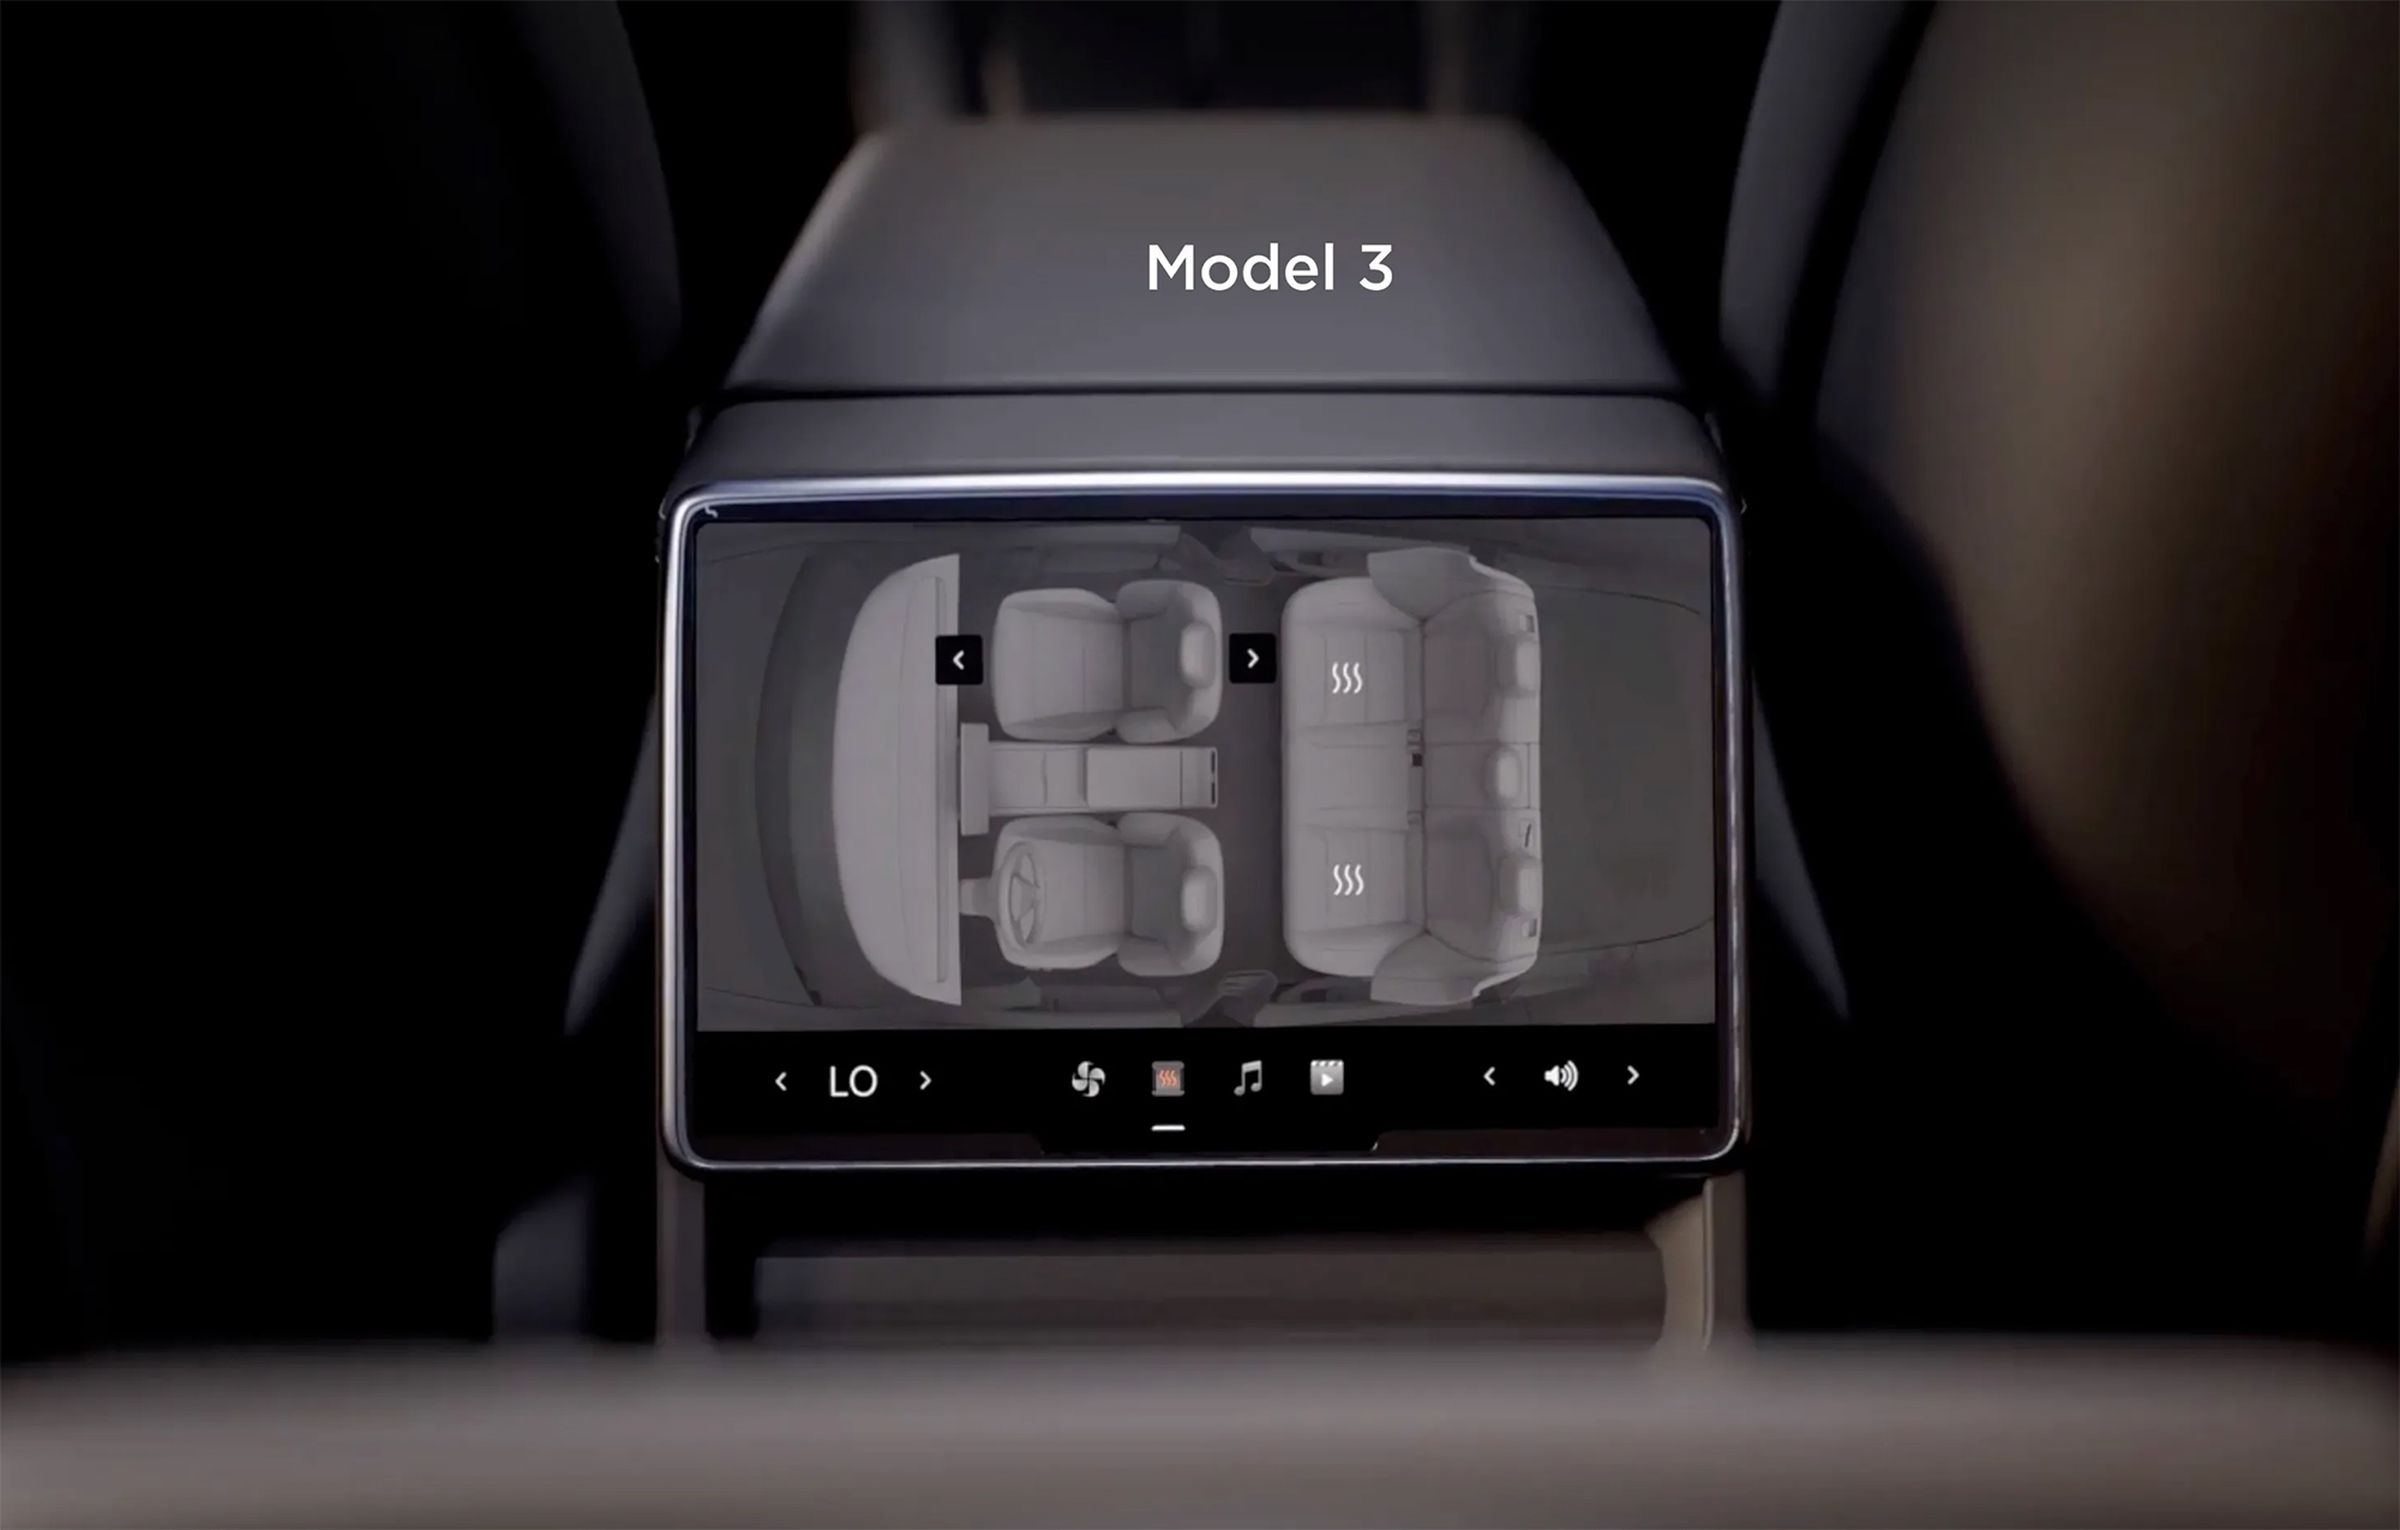 The Model 3 rear screen for passengers is mounted on the back of the center console.